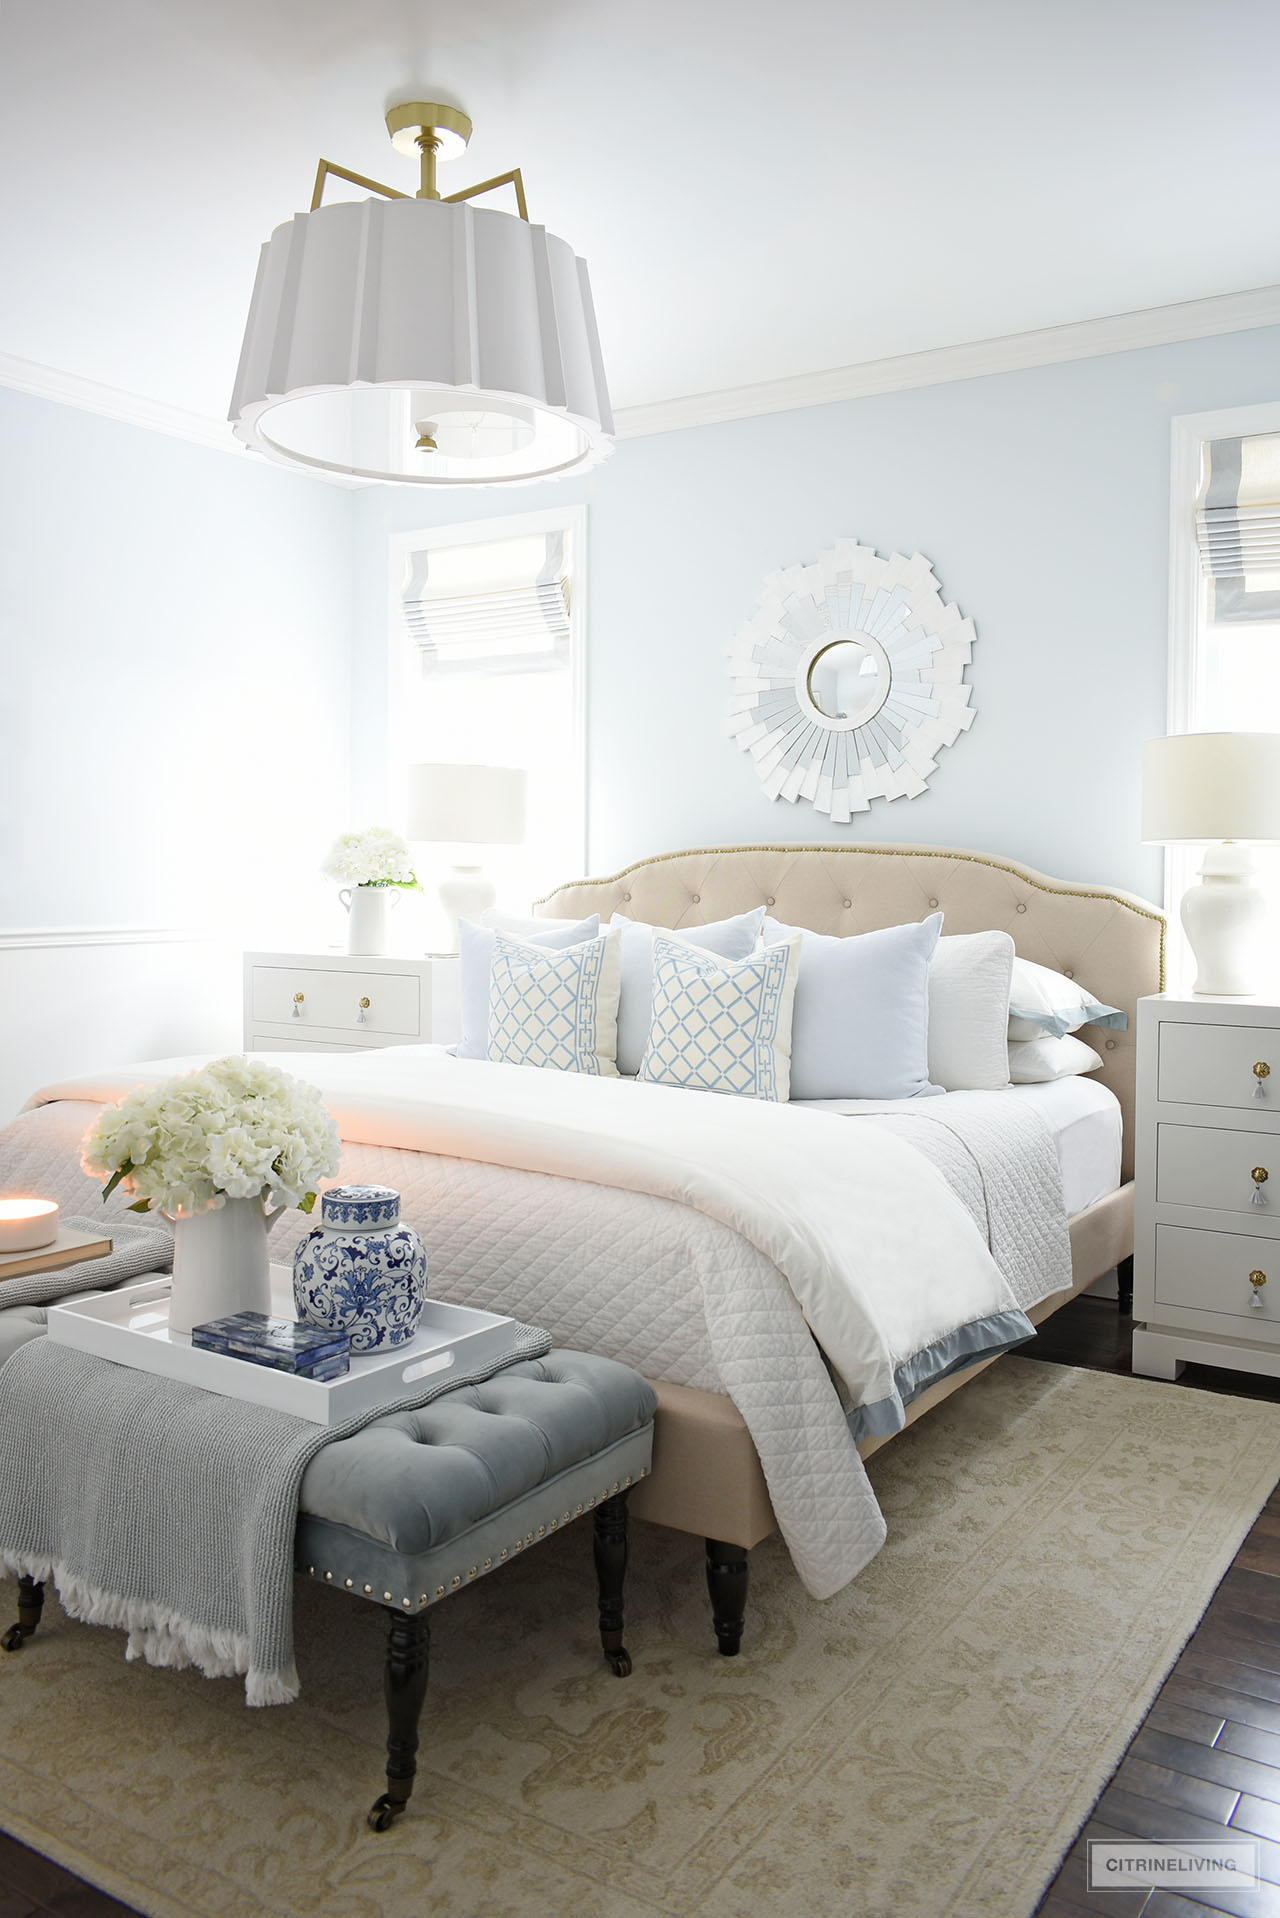 Gorgeous and calming winter bedroom decorated with soft layers of white quilted bedding and soft blue throw pillows, with a chic blue upholstered bench at the foot of the bed.